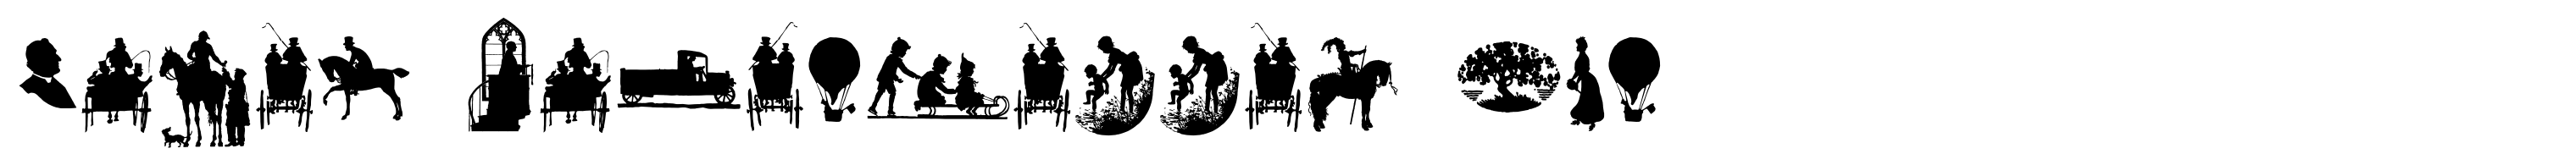 Mixed Silhouettes Two